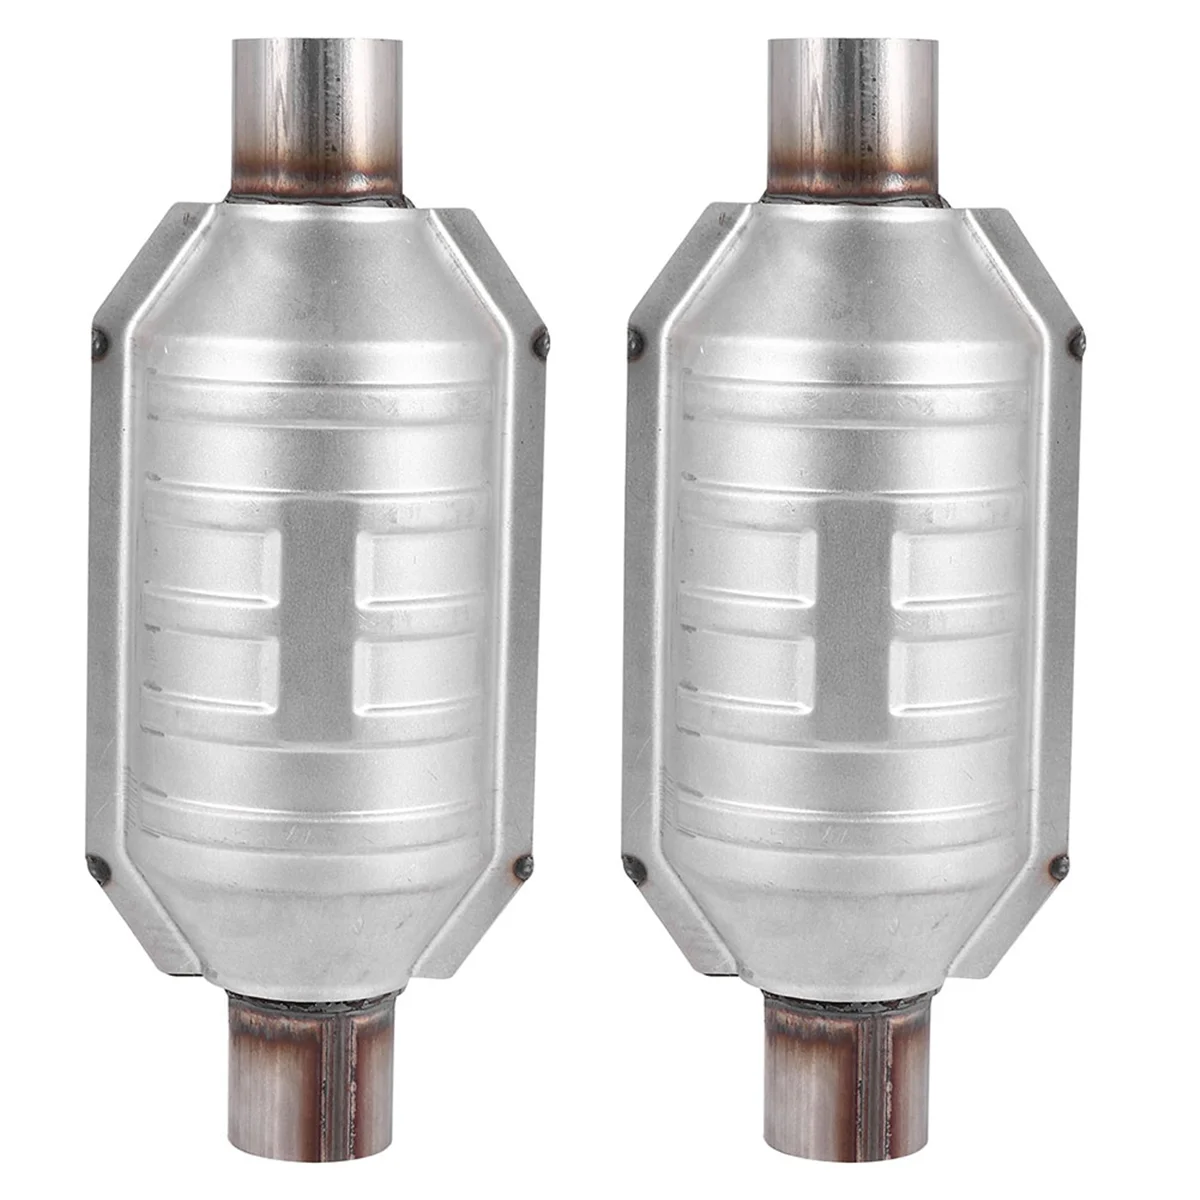 

2PCS Inlet/Outlet Universal Catalytic Converter,with O2 Port & Heat Shield 53004 Car Stainless Steel Catalytic Converter